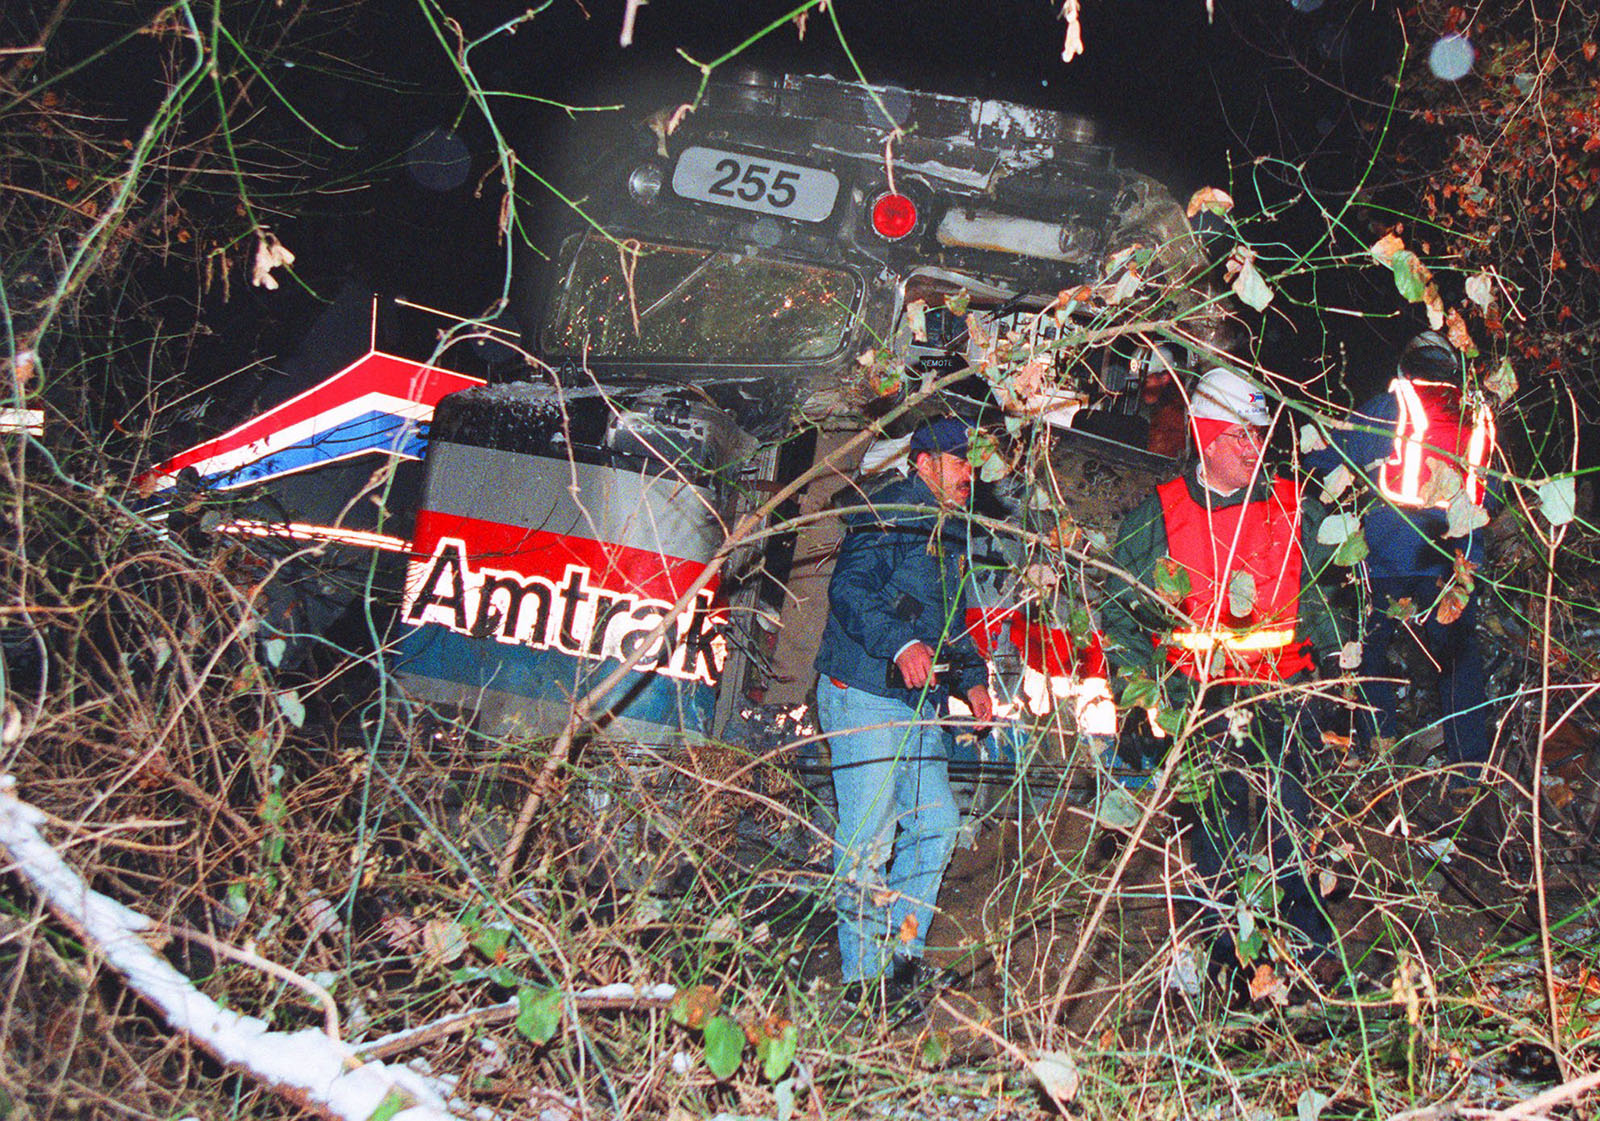 Investigators look over the front engine of the Amtrak train that collided with a MARC commuter train during a snow storm Friday, Feb. 16, 1996 in Silver Spring, Md. At least 12 people were killed and a score were injured. (AP Photo/Ruth Fremson)